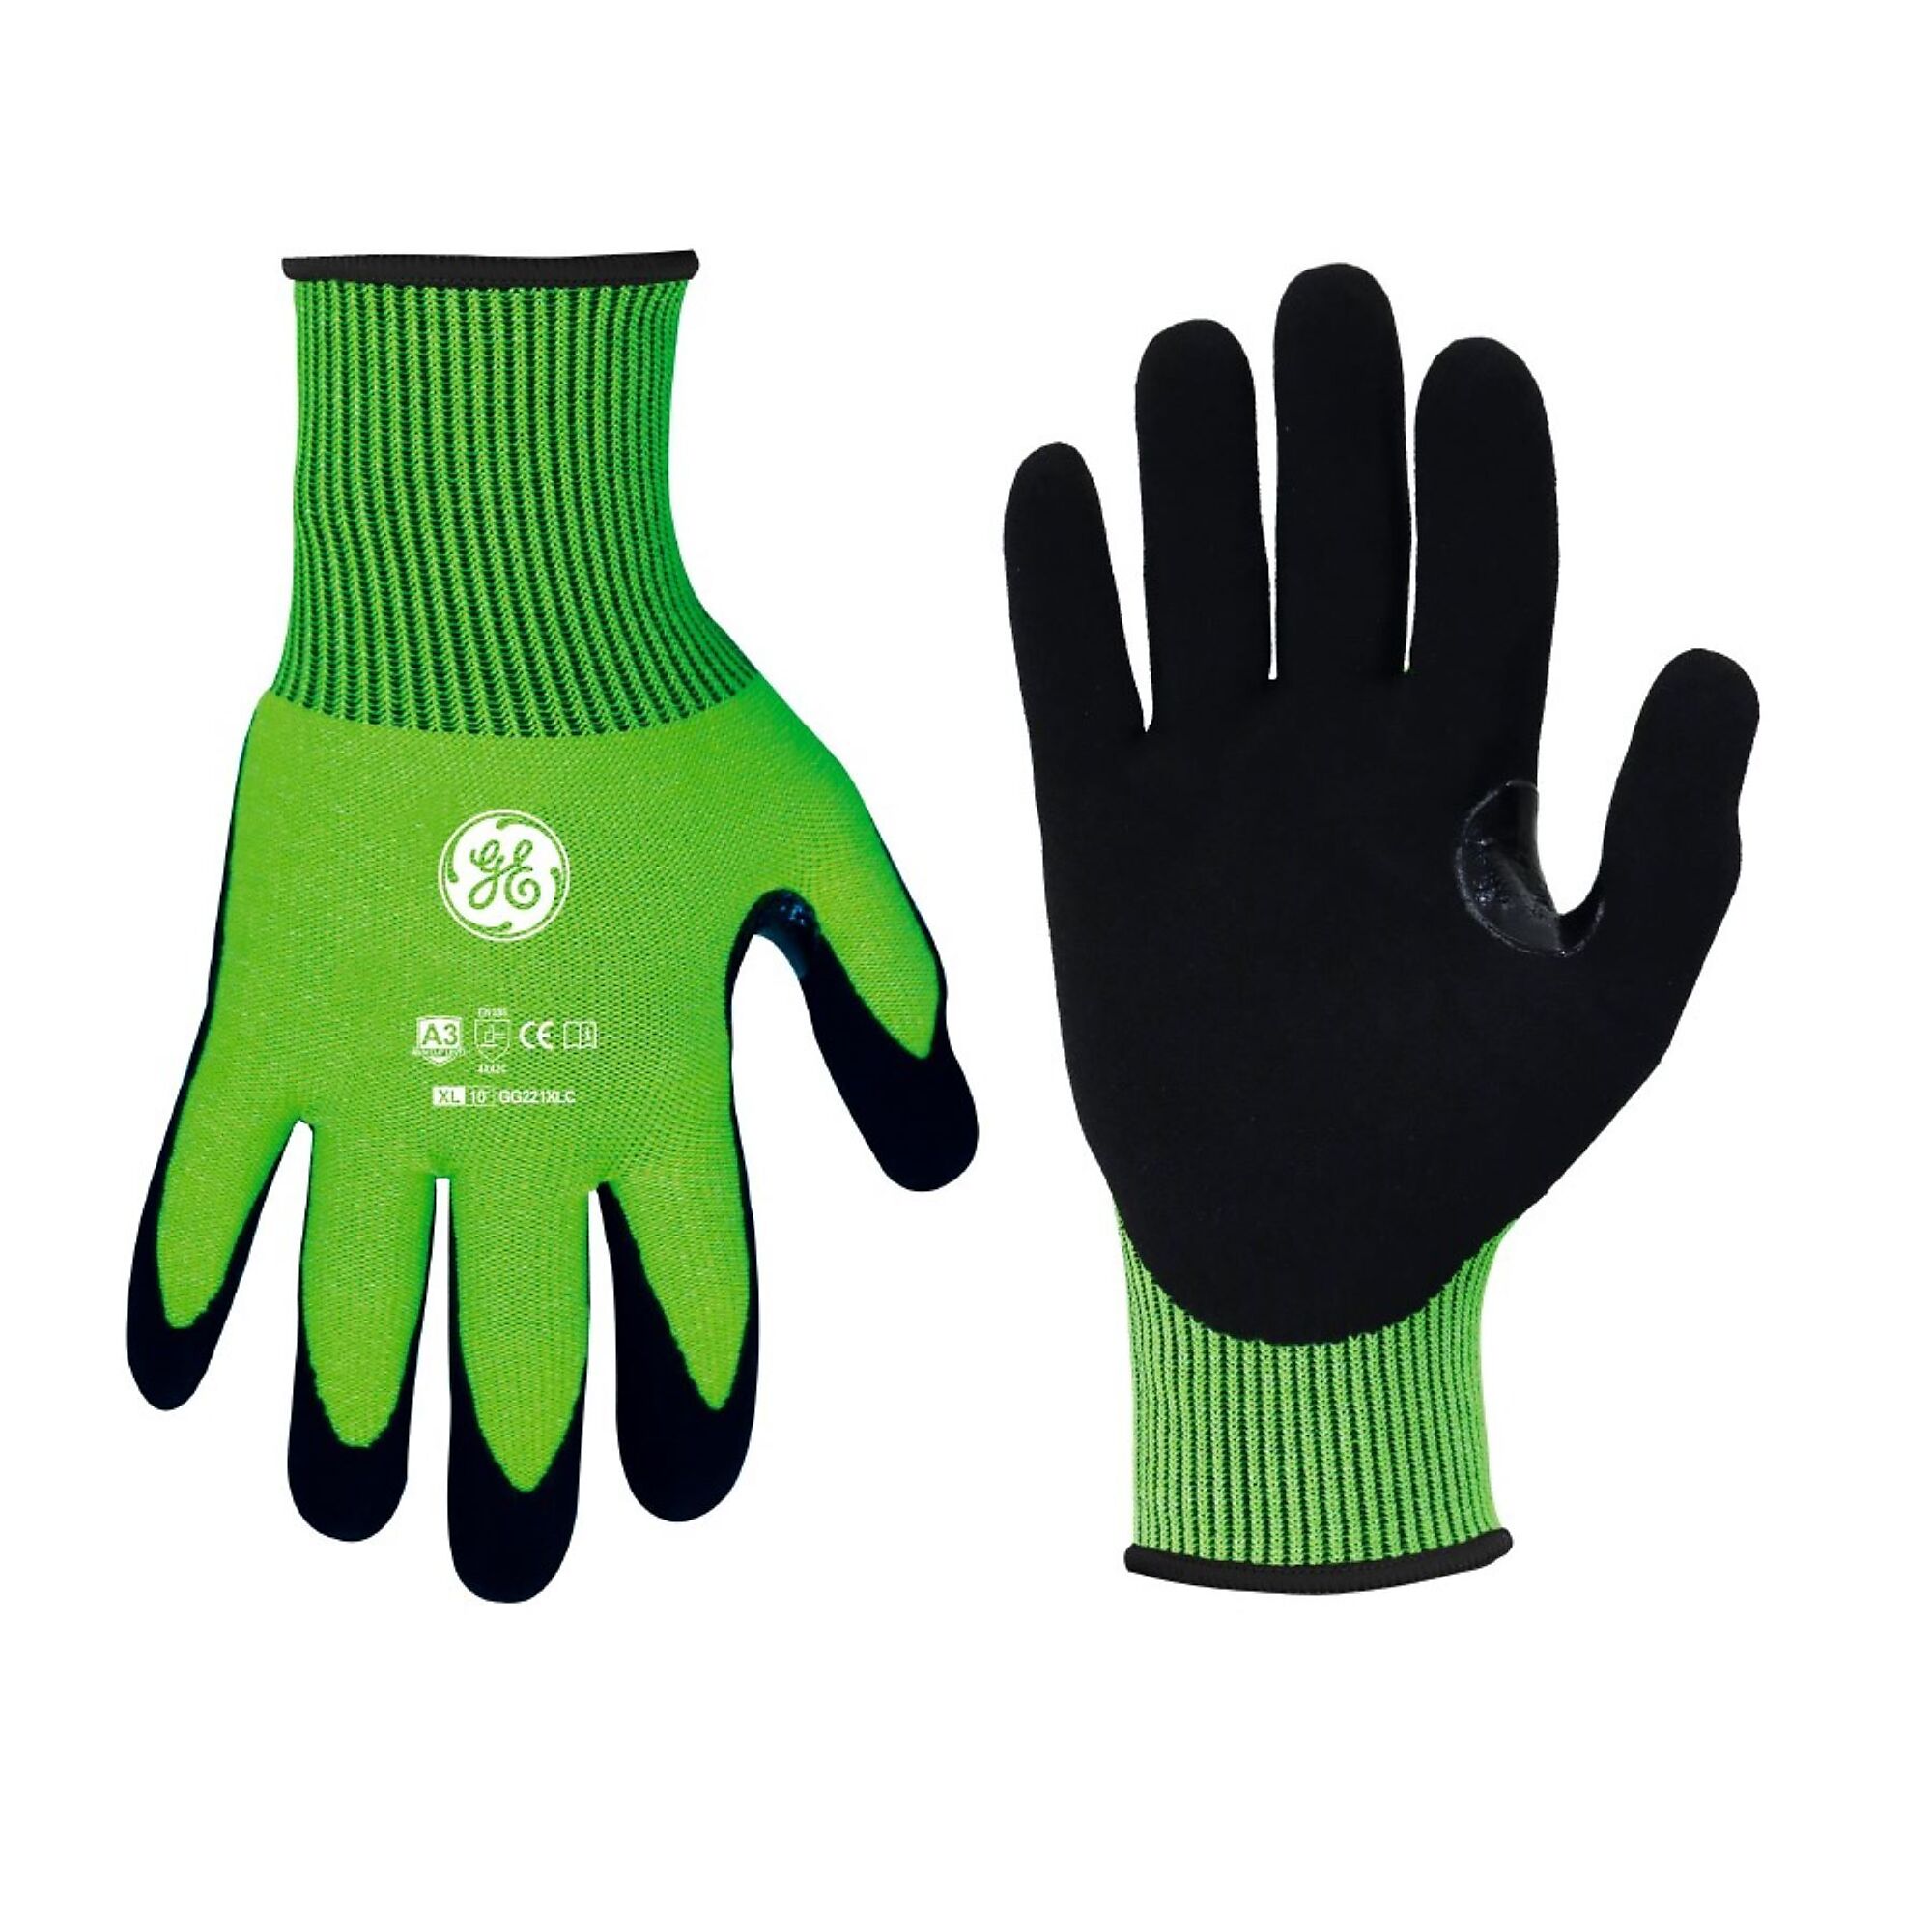 General Electric, Unisex Dipped Gloves Black/High-Vis Grn XL 12 pair, Size XL, Included (qty.) 12, Model GG221XL